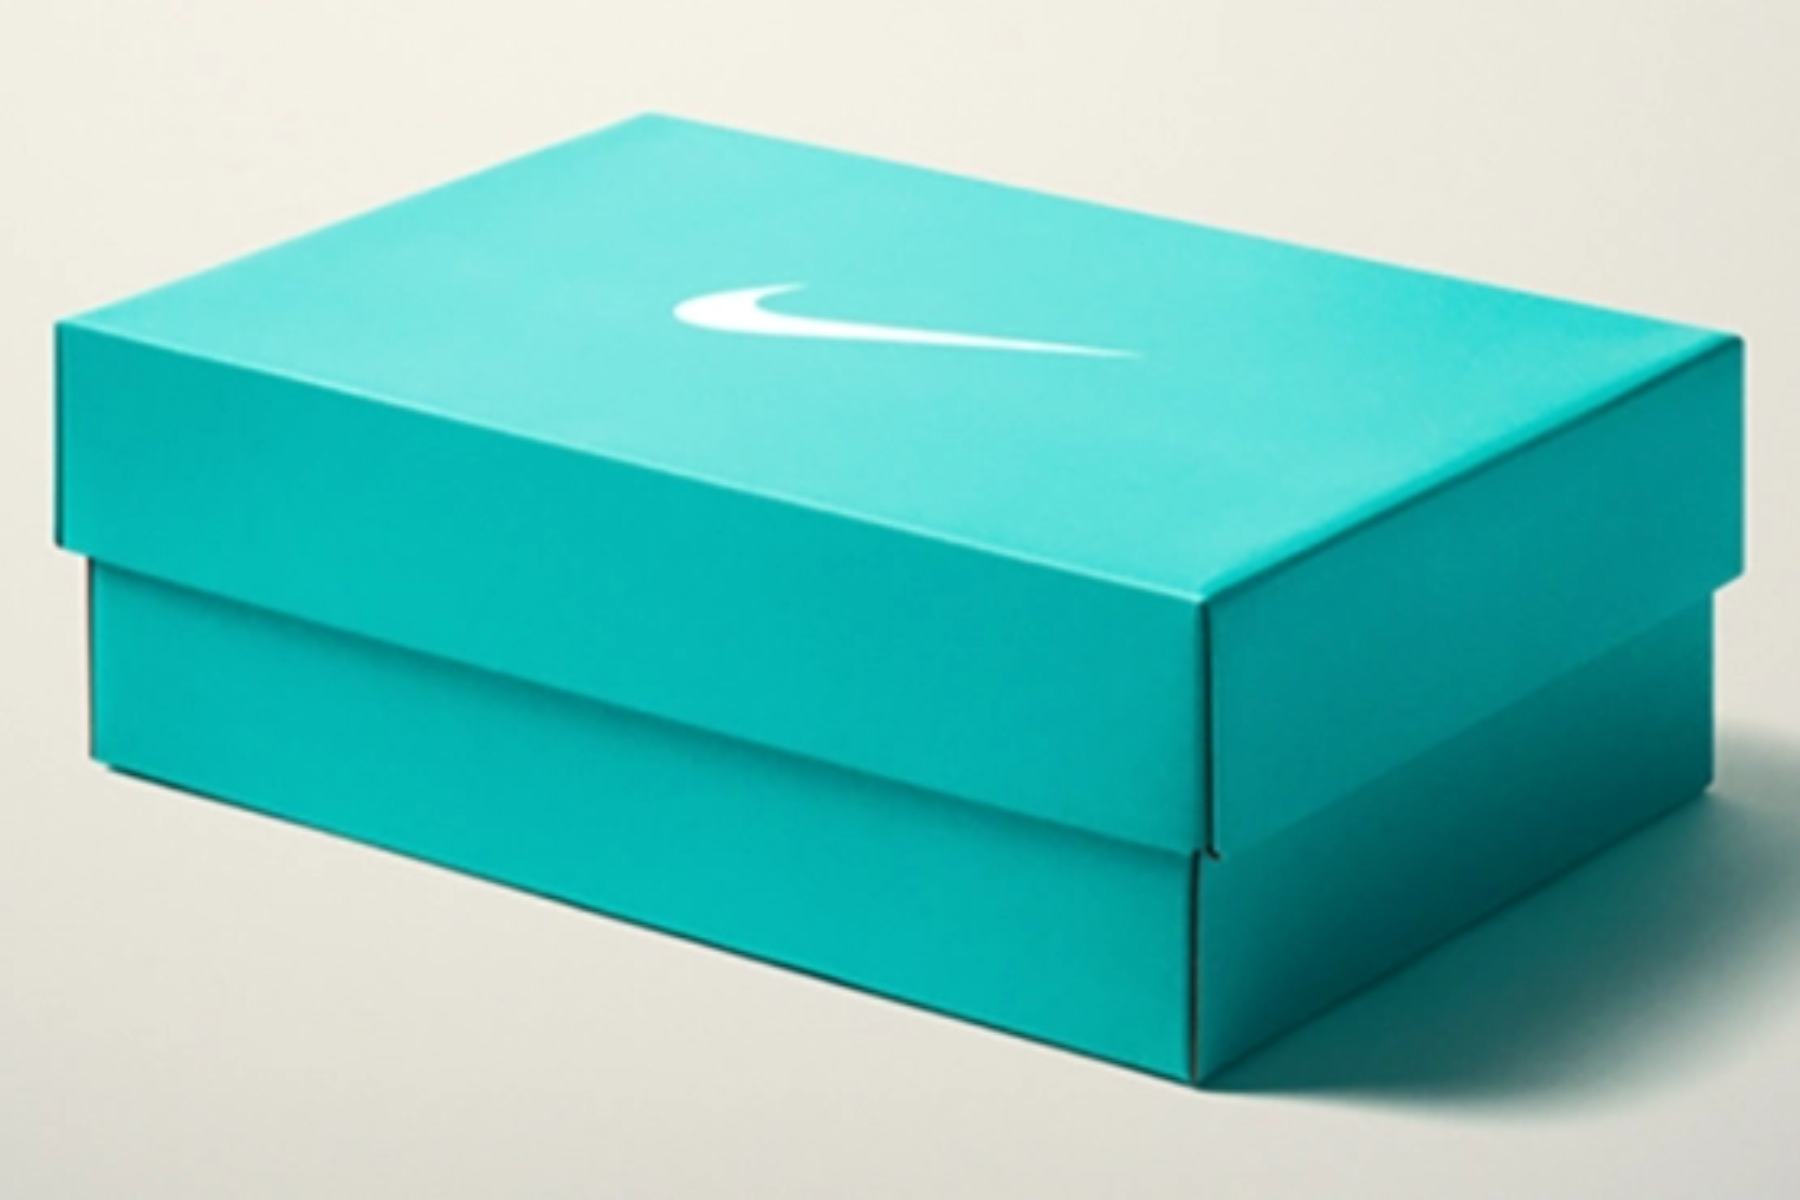 Tiffany & Co. And Nike Just Unveiled A 23-Pound Sterling-Silver Shoebox